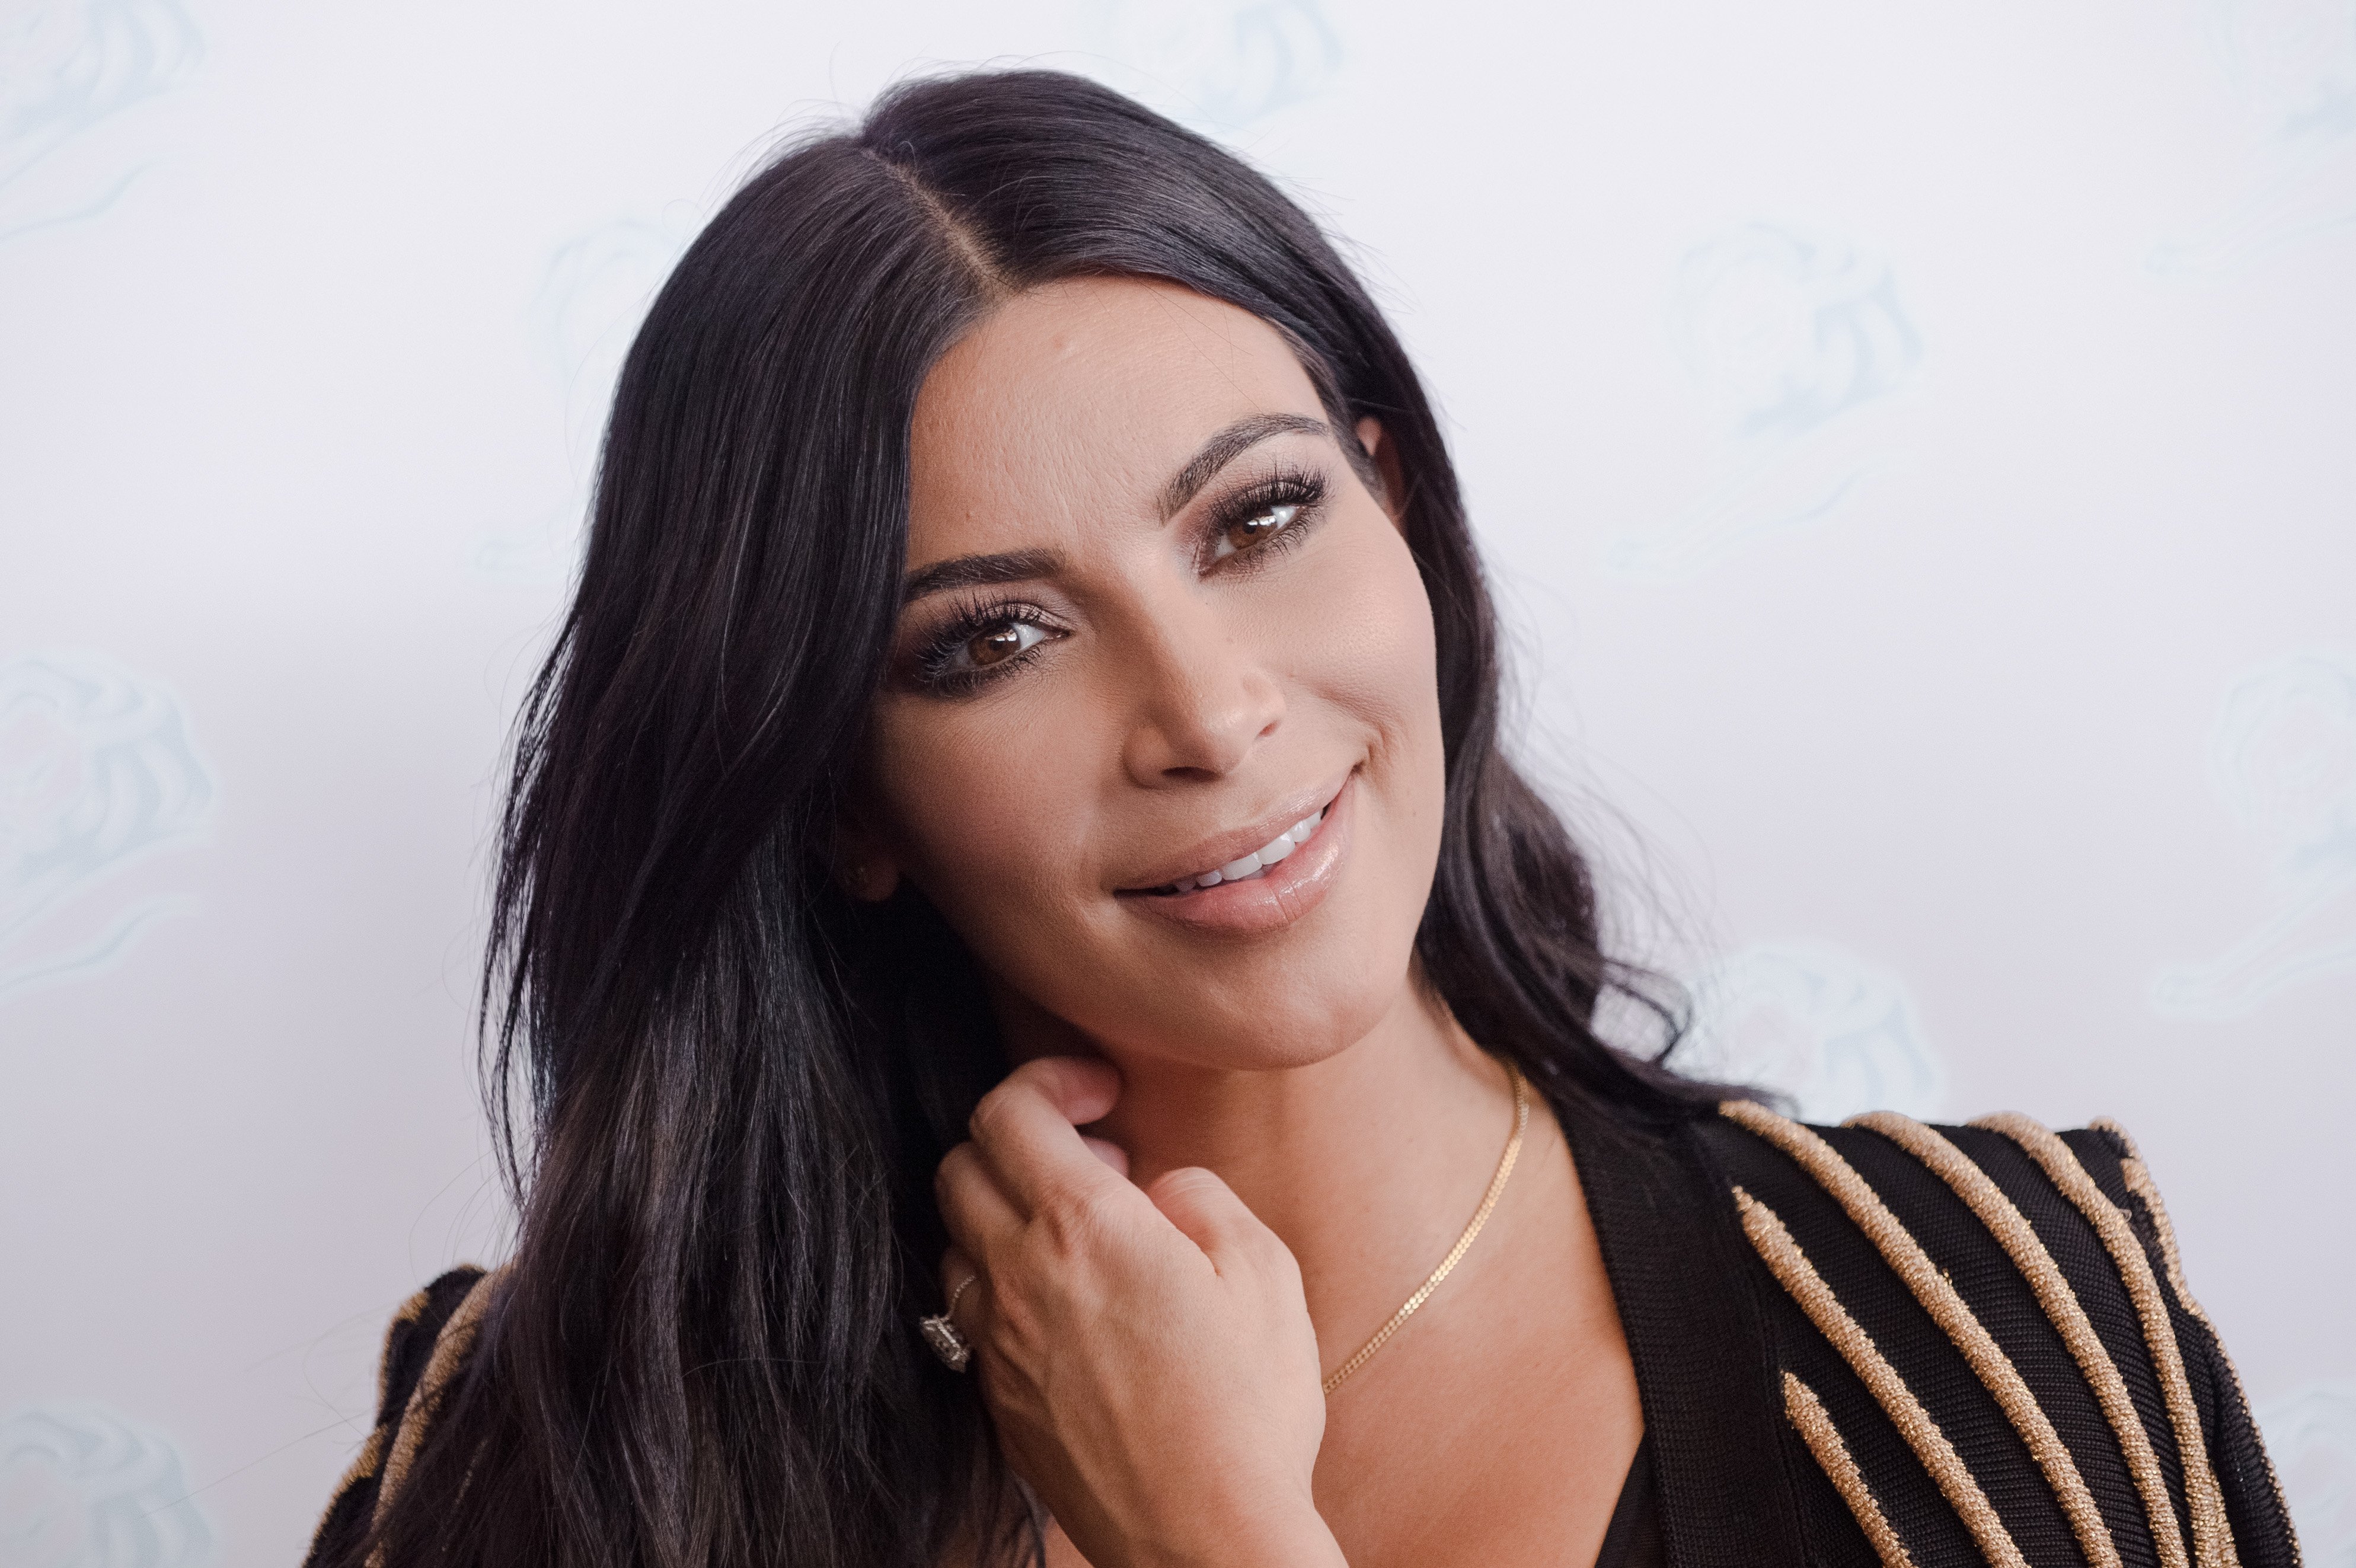 Kim Kardashian at a 'Sudler' talk during Cannes Lions International Festival of Creativity on June 24, 2015 in France | Photo: Getty Images